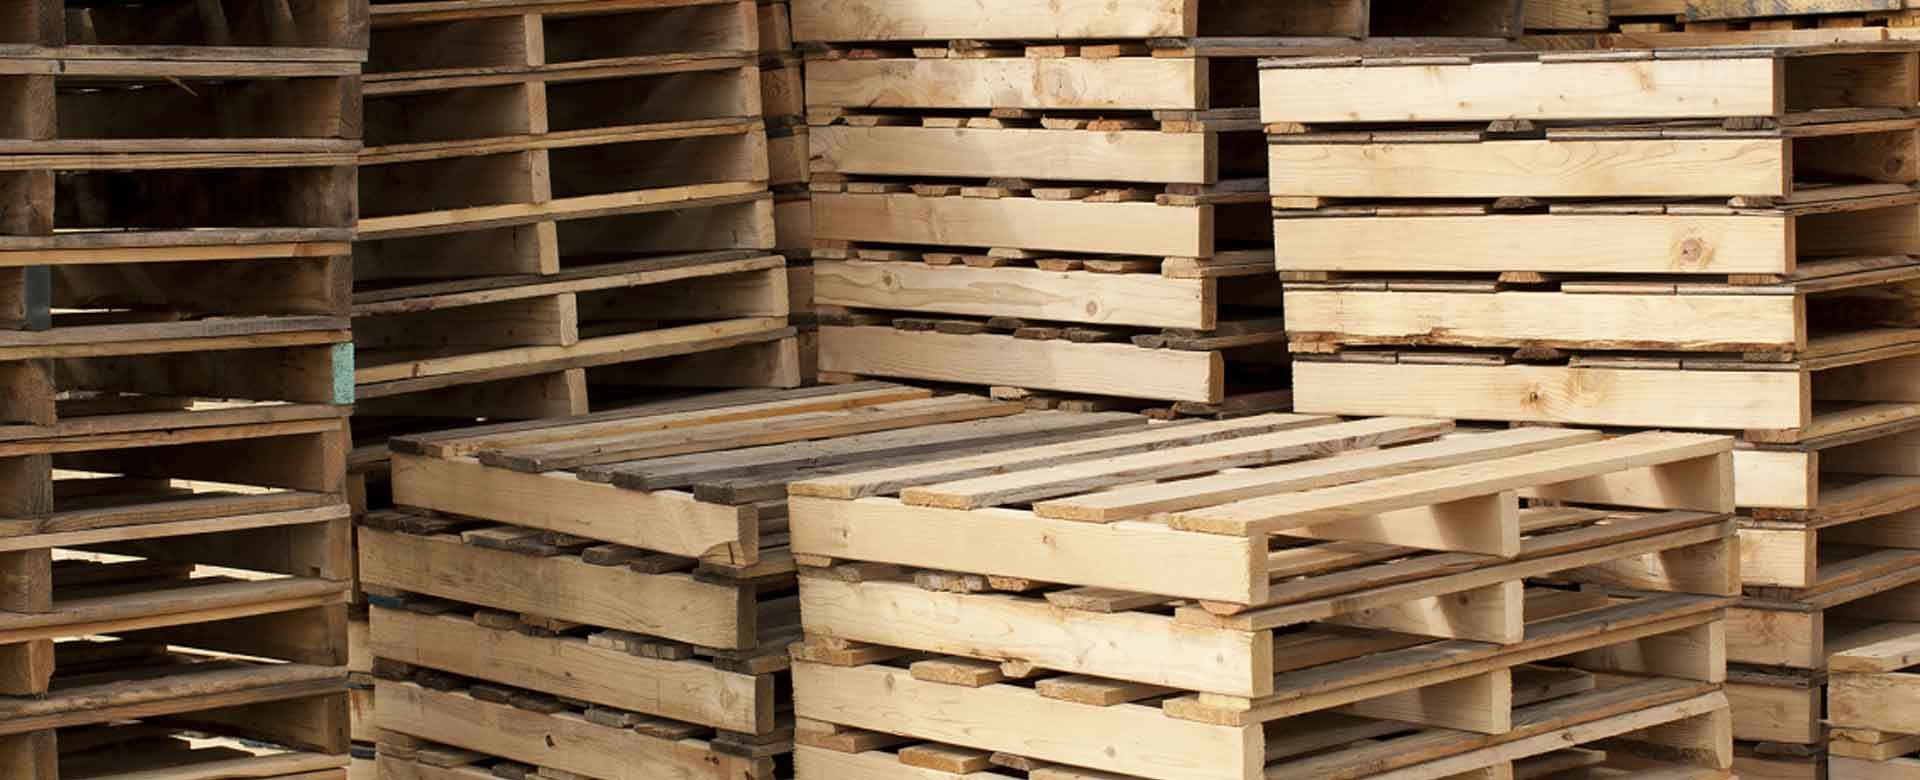 Case study: pallet company saves big with coating systems